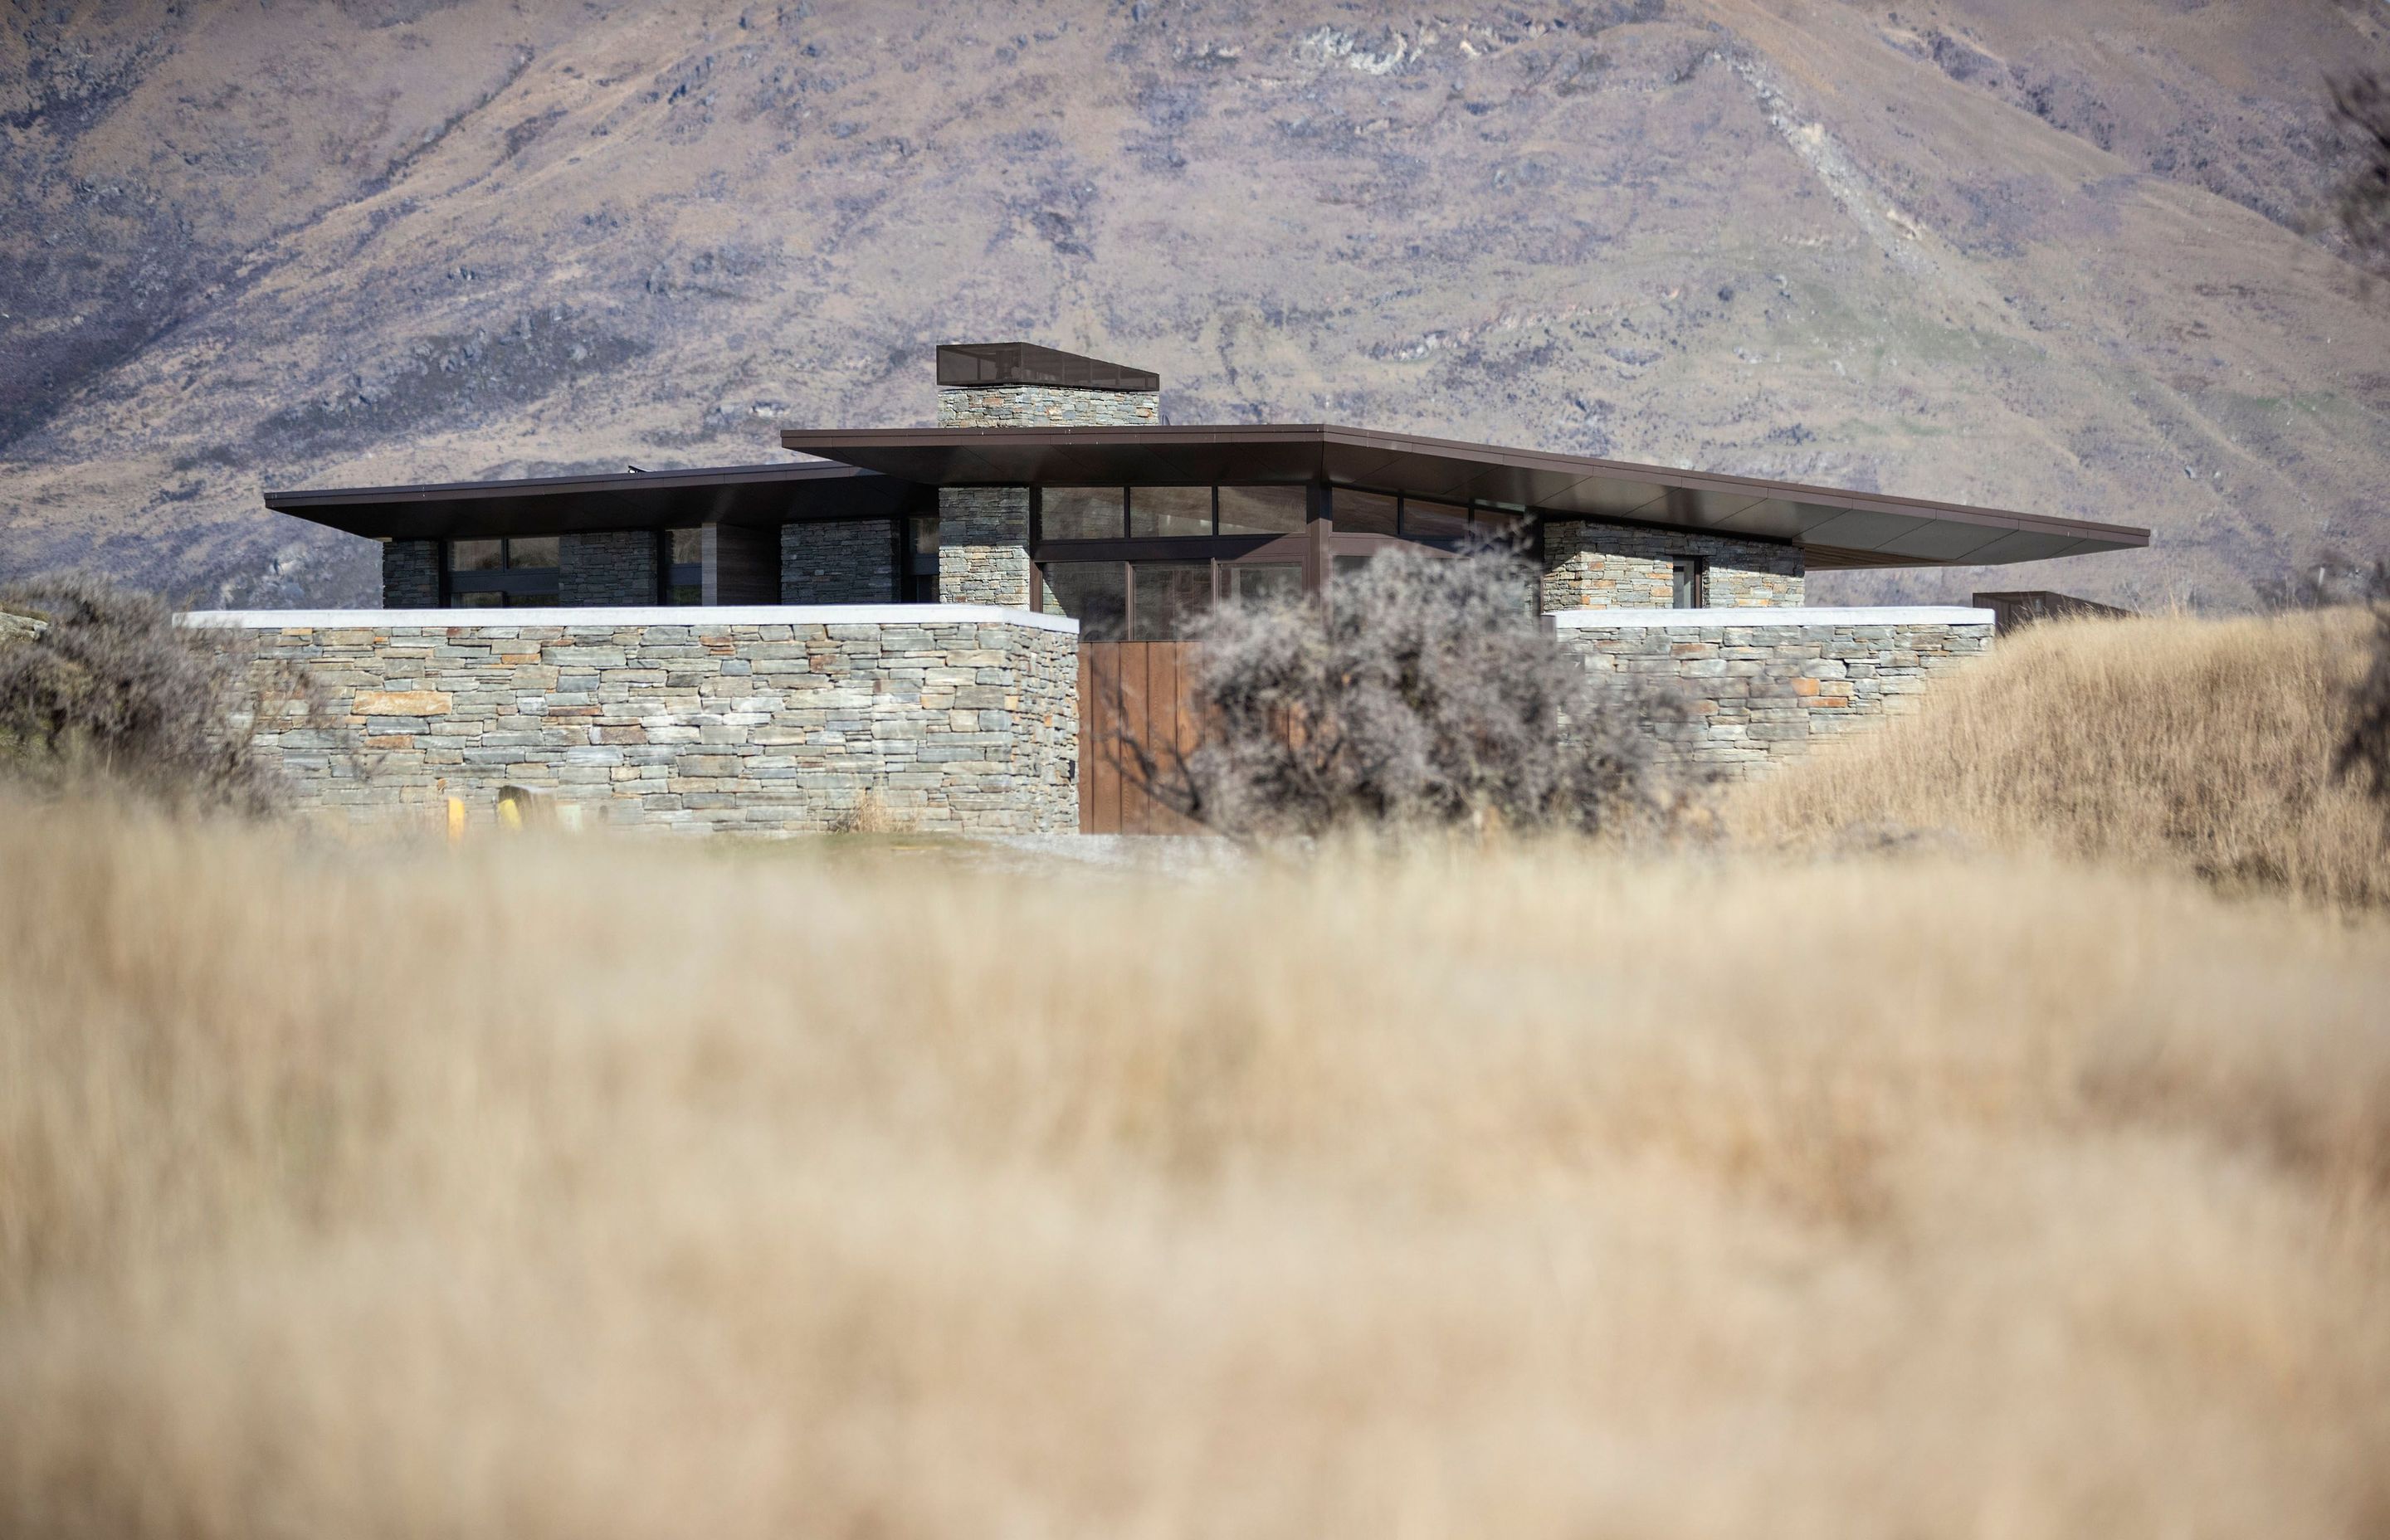 A low form, bronze aluminum joinery, cedar cladding and local schist help to blend the house into the surrounding tussock grasslands and rocky outcrops on the 1.272-hectare site. SD